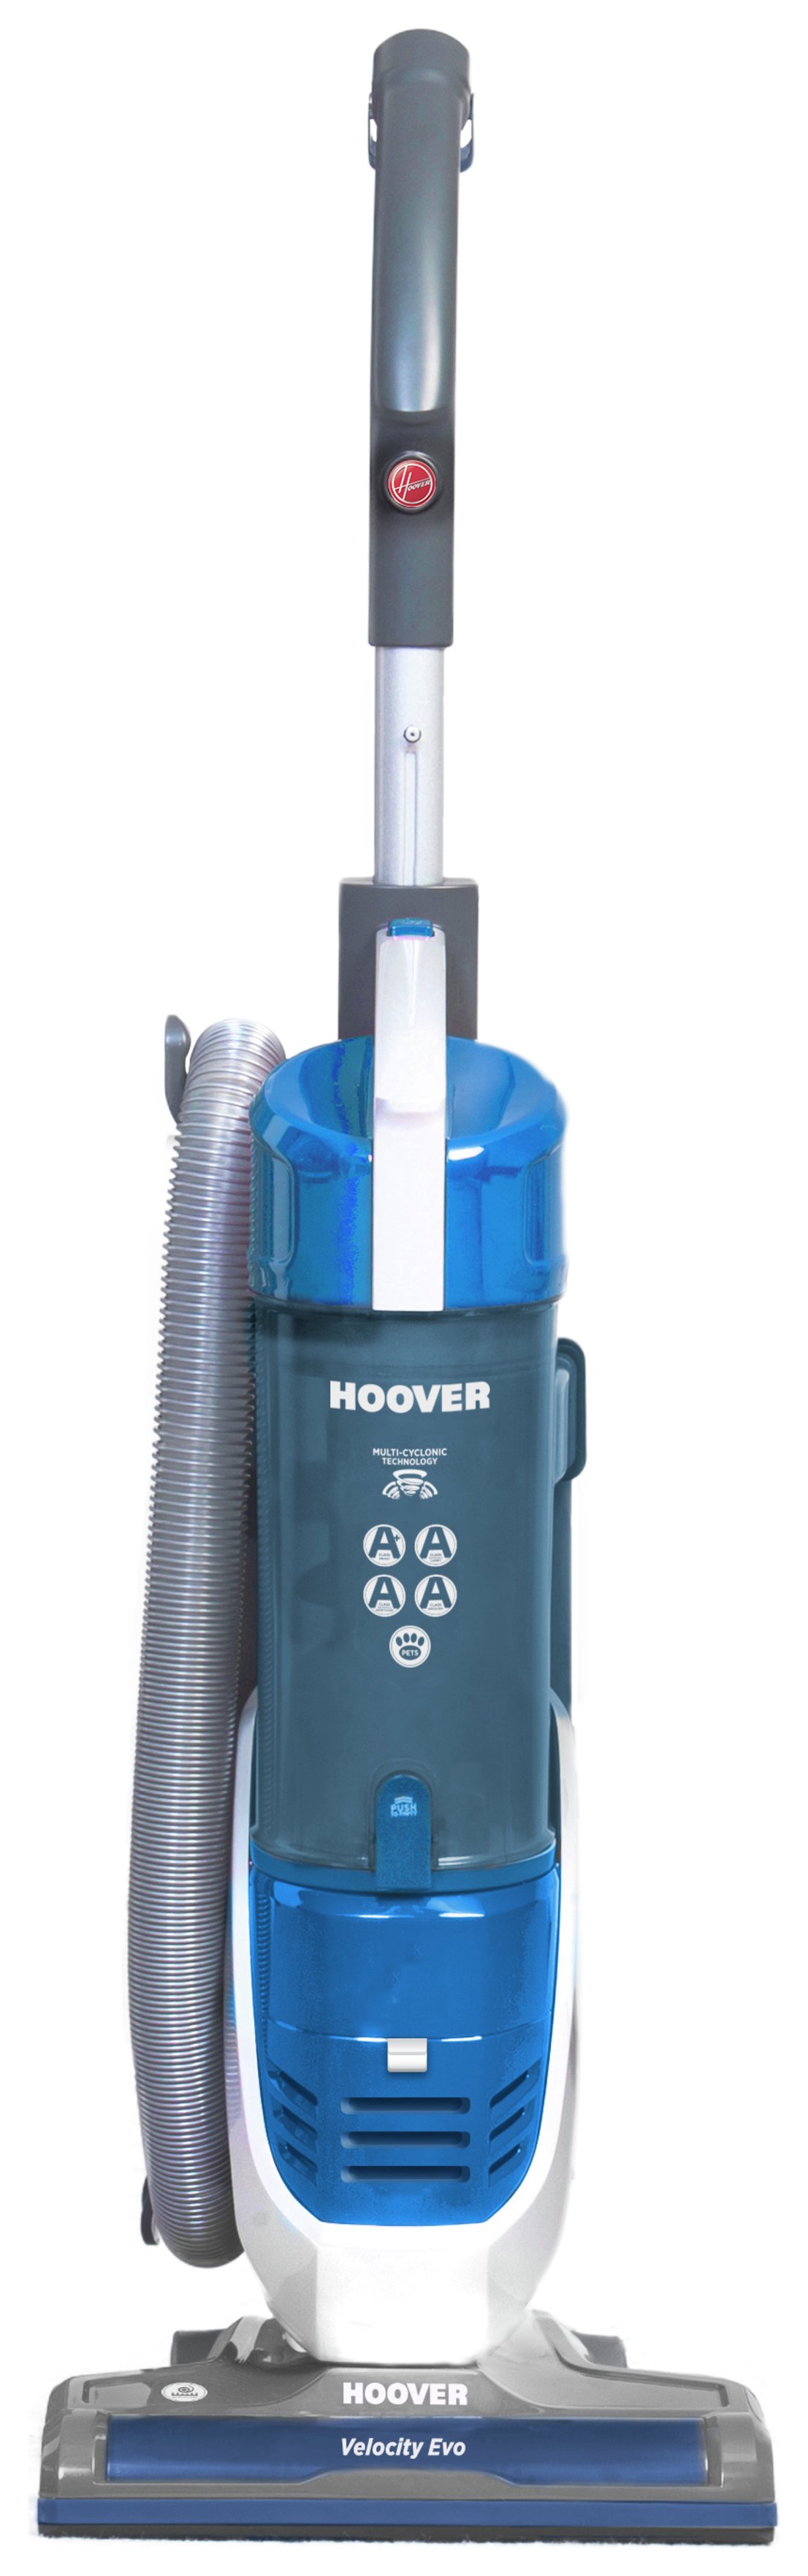 Hoover Velocity Evo Pets Bagless Upright Vacuum Cleaner